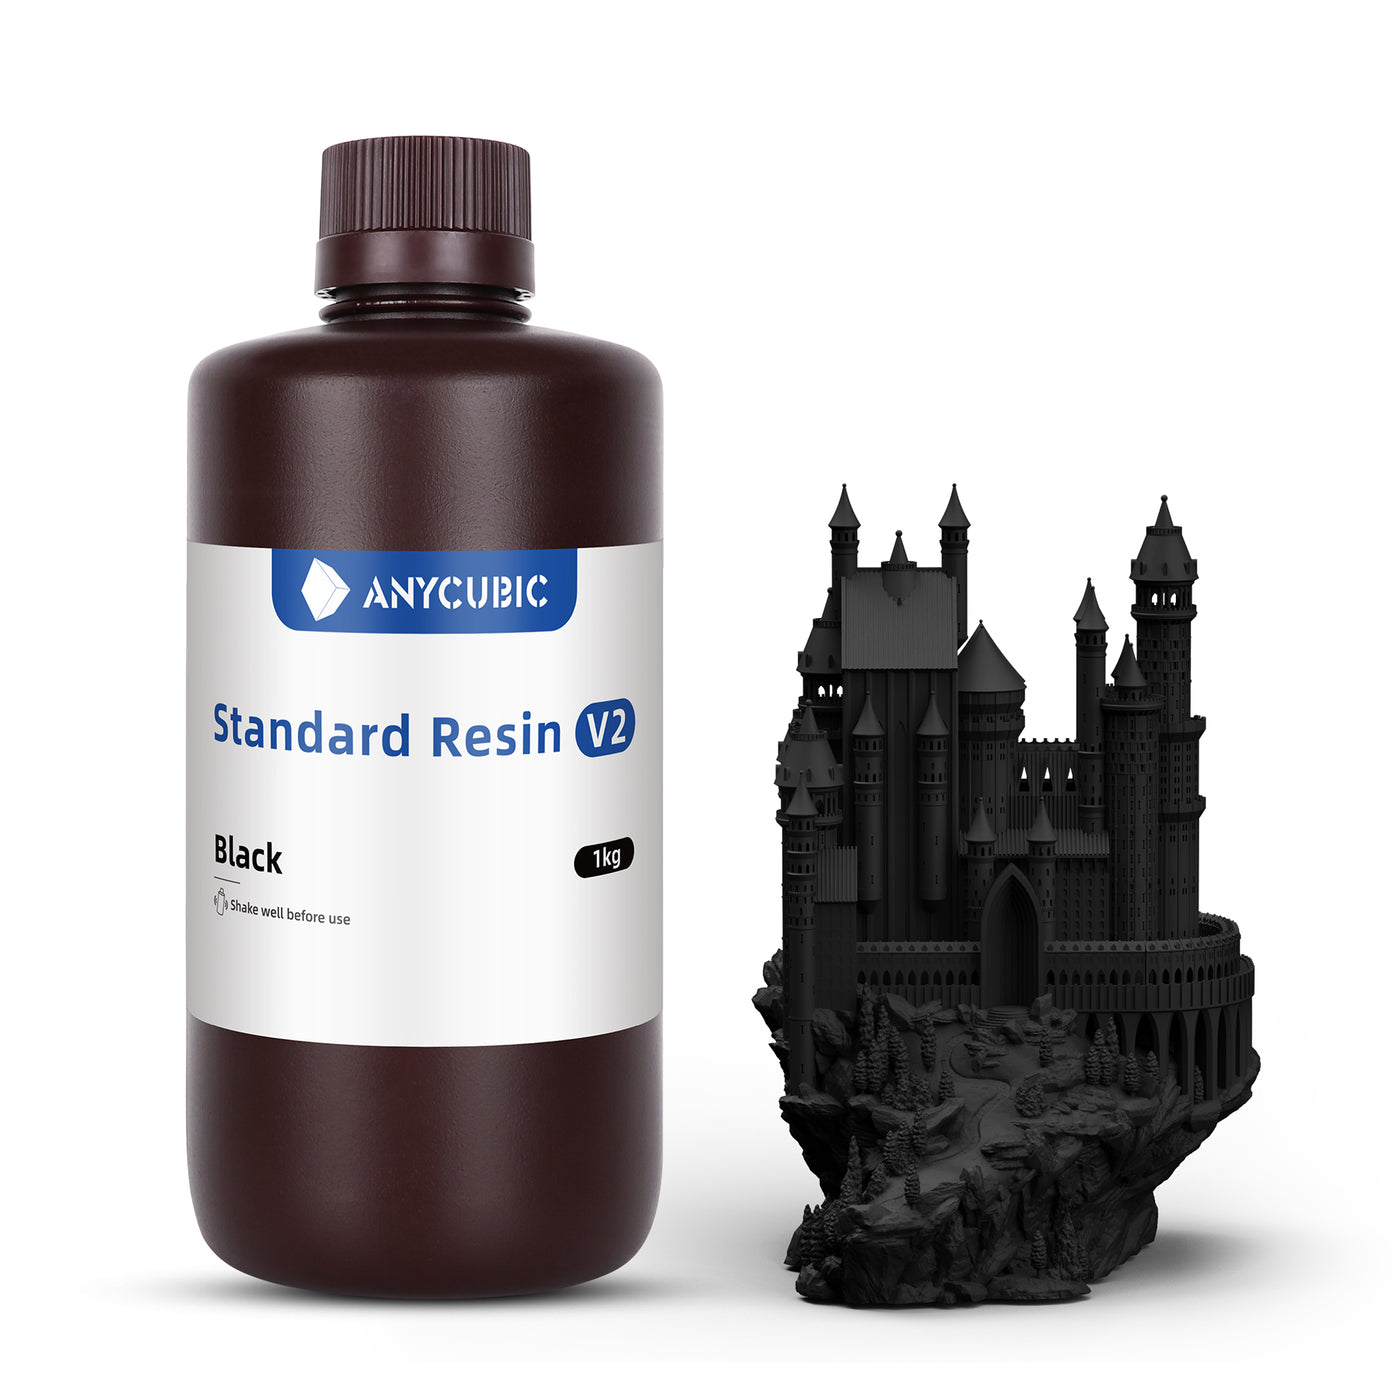 Standard Resin V2 - Get 3 for the Price of 2